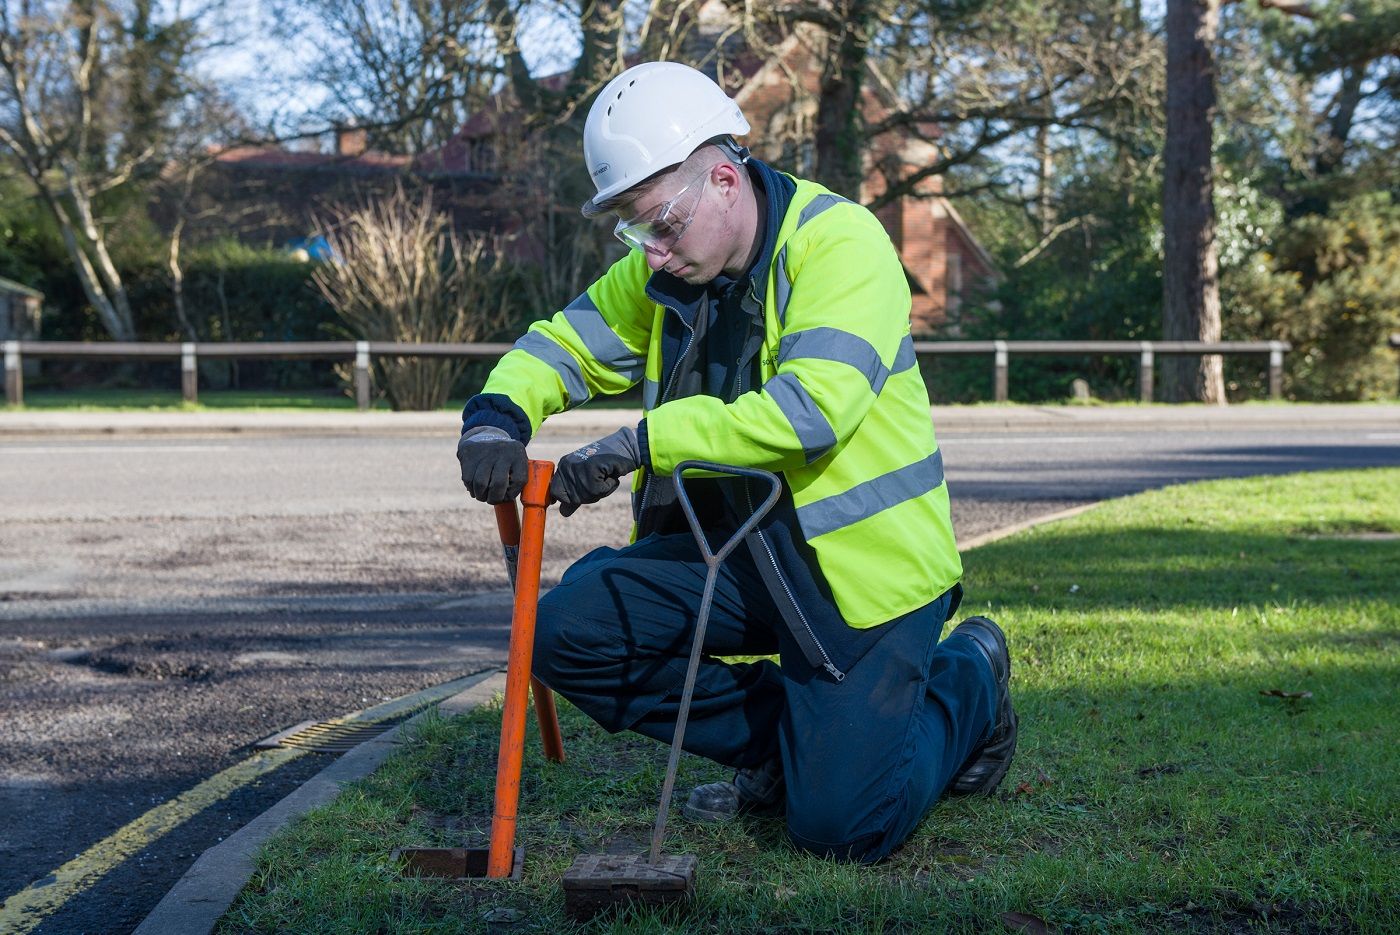 South East Water technician installing a water meter